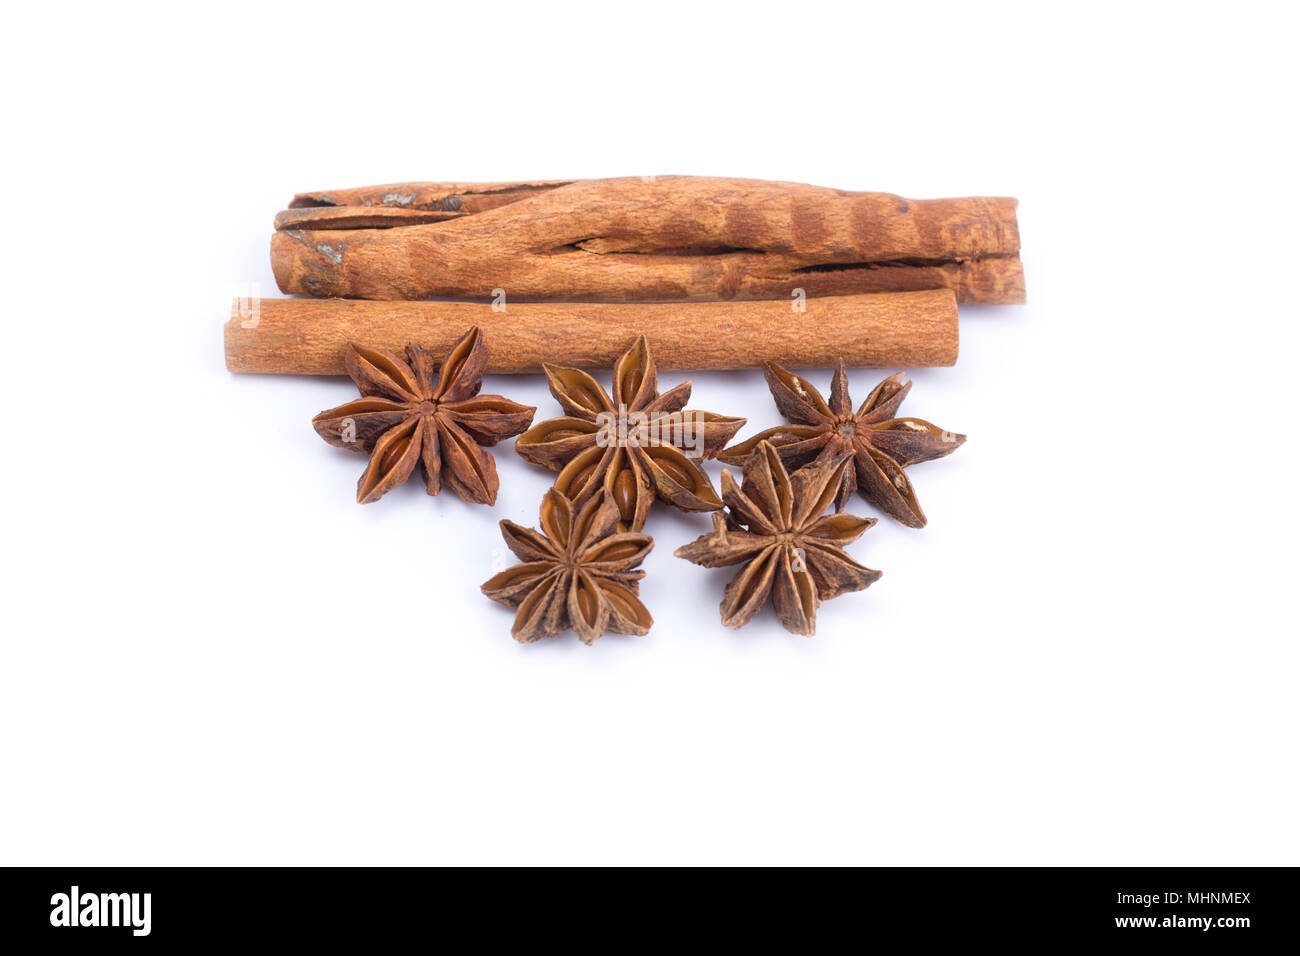 cinnamon stick and star anise spice isolated on white background Stock Photo